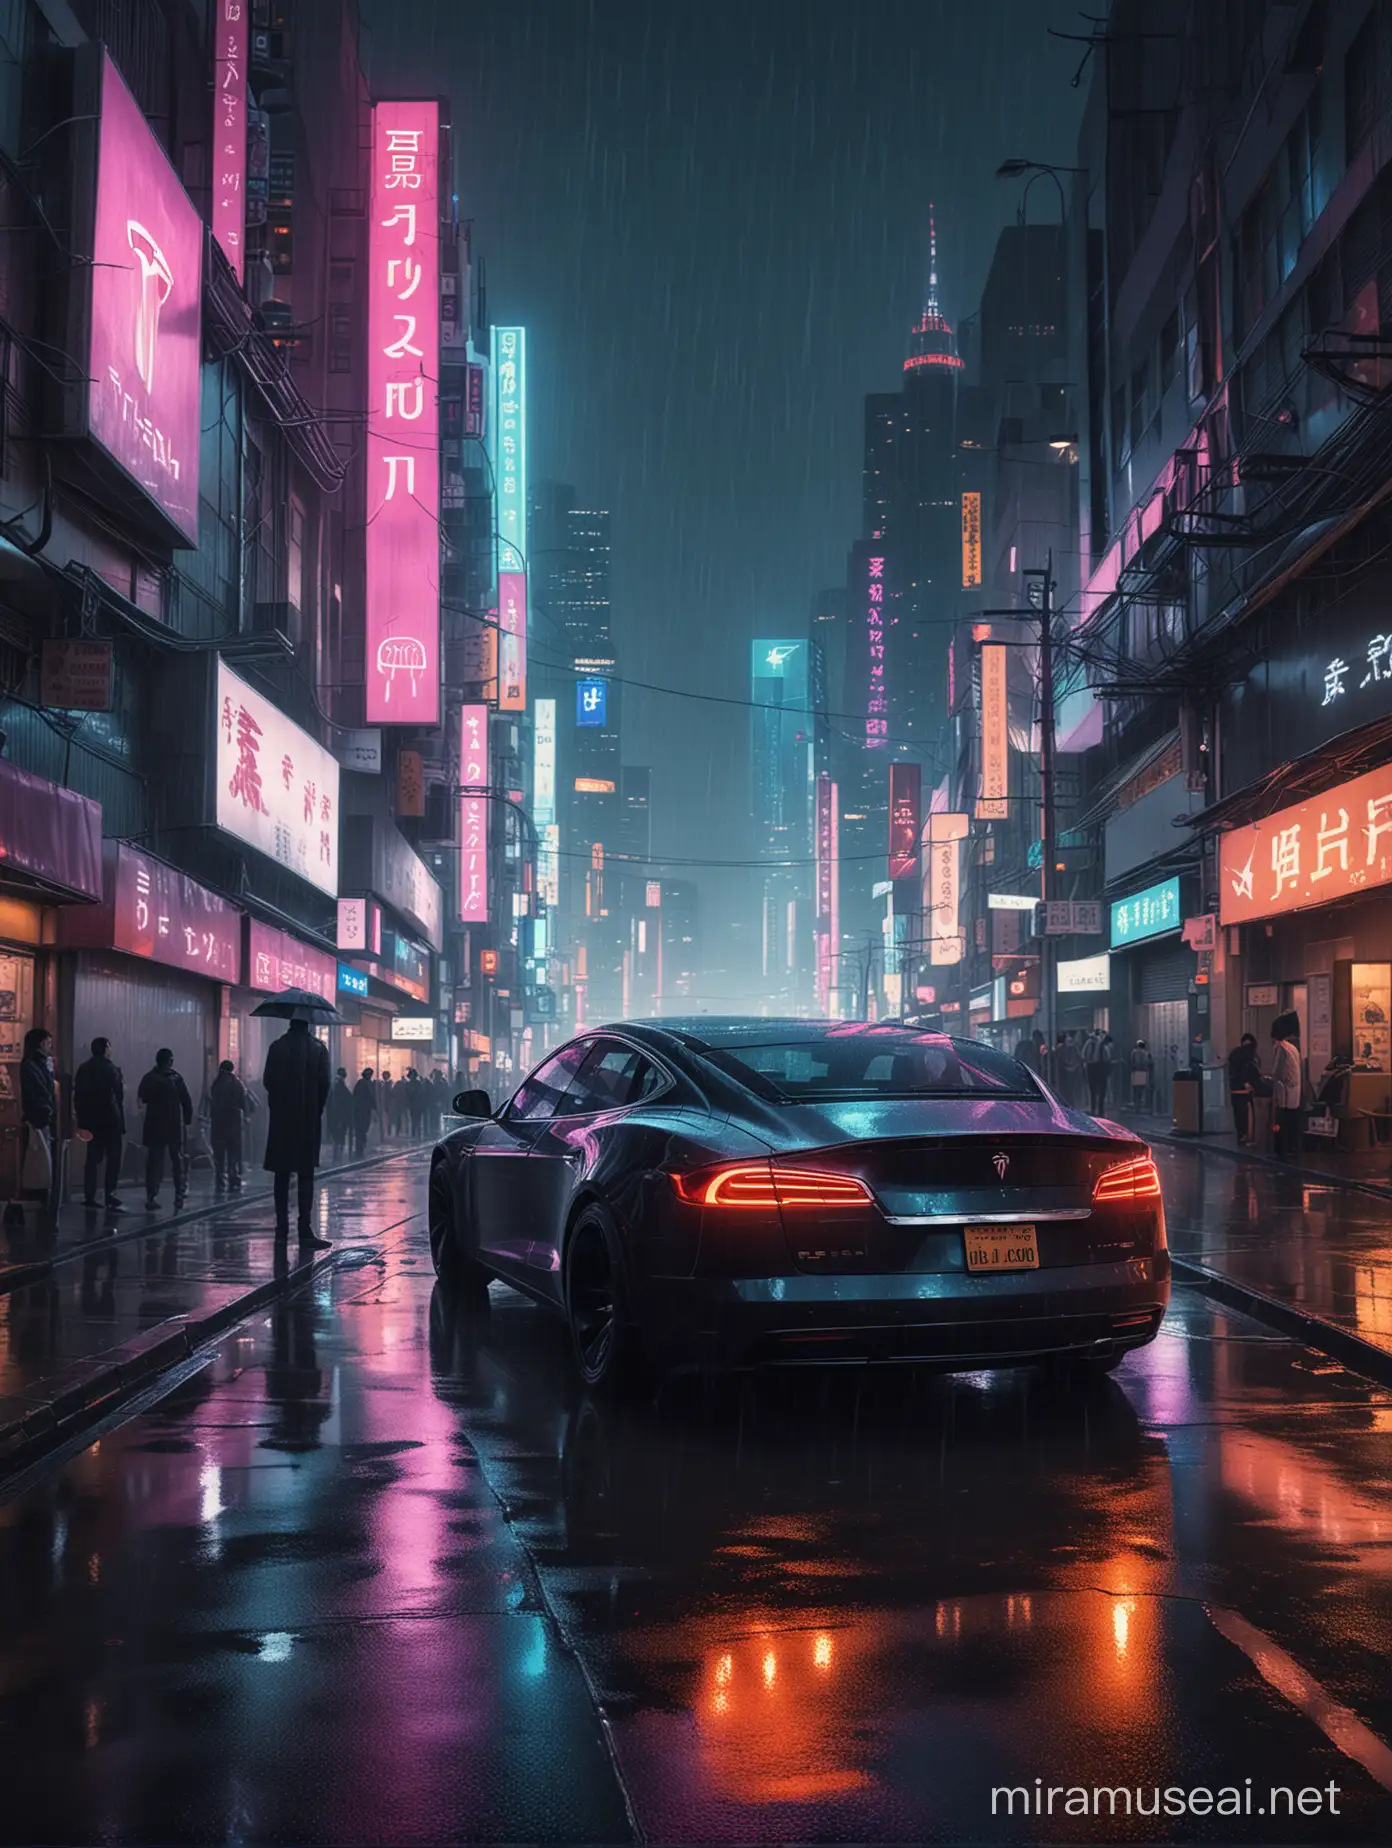 The poster features a hyper-realistic scene set in a futuristic Tokyo cityscape reminiscent of "Blade Runner."
Centered in the composition is a dystopian man sitting inside a sleek black Tesla vehicle parked on a rain-soaked street.
The man is depicted with a weary expression, wearing futuristic attire that blends cyberpunk elements with a noir aesthetic.
The Tesla's headlights pierce through the darkness, casting a subtle glow on the man's face and the surrounding environment.
Behind the Tesla, towering skyscrapers adorned with neon signs stretch into the night sky, creating a maze of urban sprawl.
The city streets are slick with rain, reflecting the vibrant neon lights and adding depth to the scene.
The overall color palette is dominated by deep blues, purples, and oranges, reminiscent of the neon-lit streets of Tokyo at night.